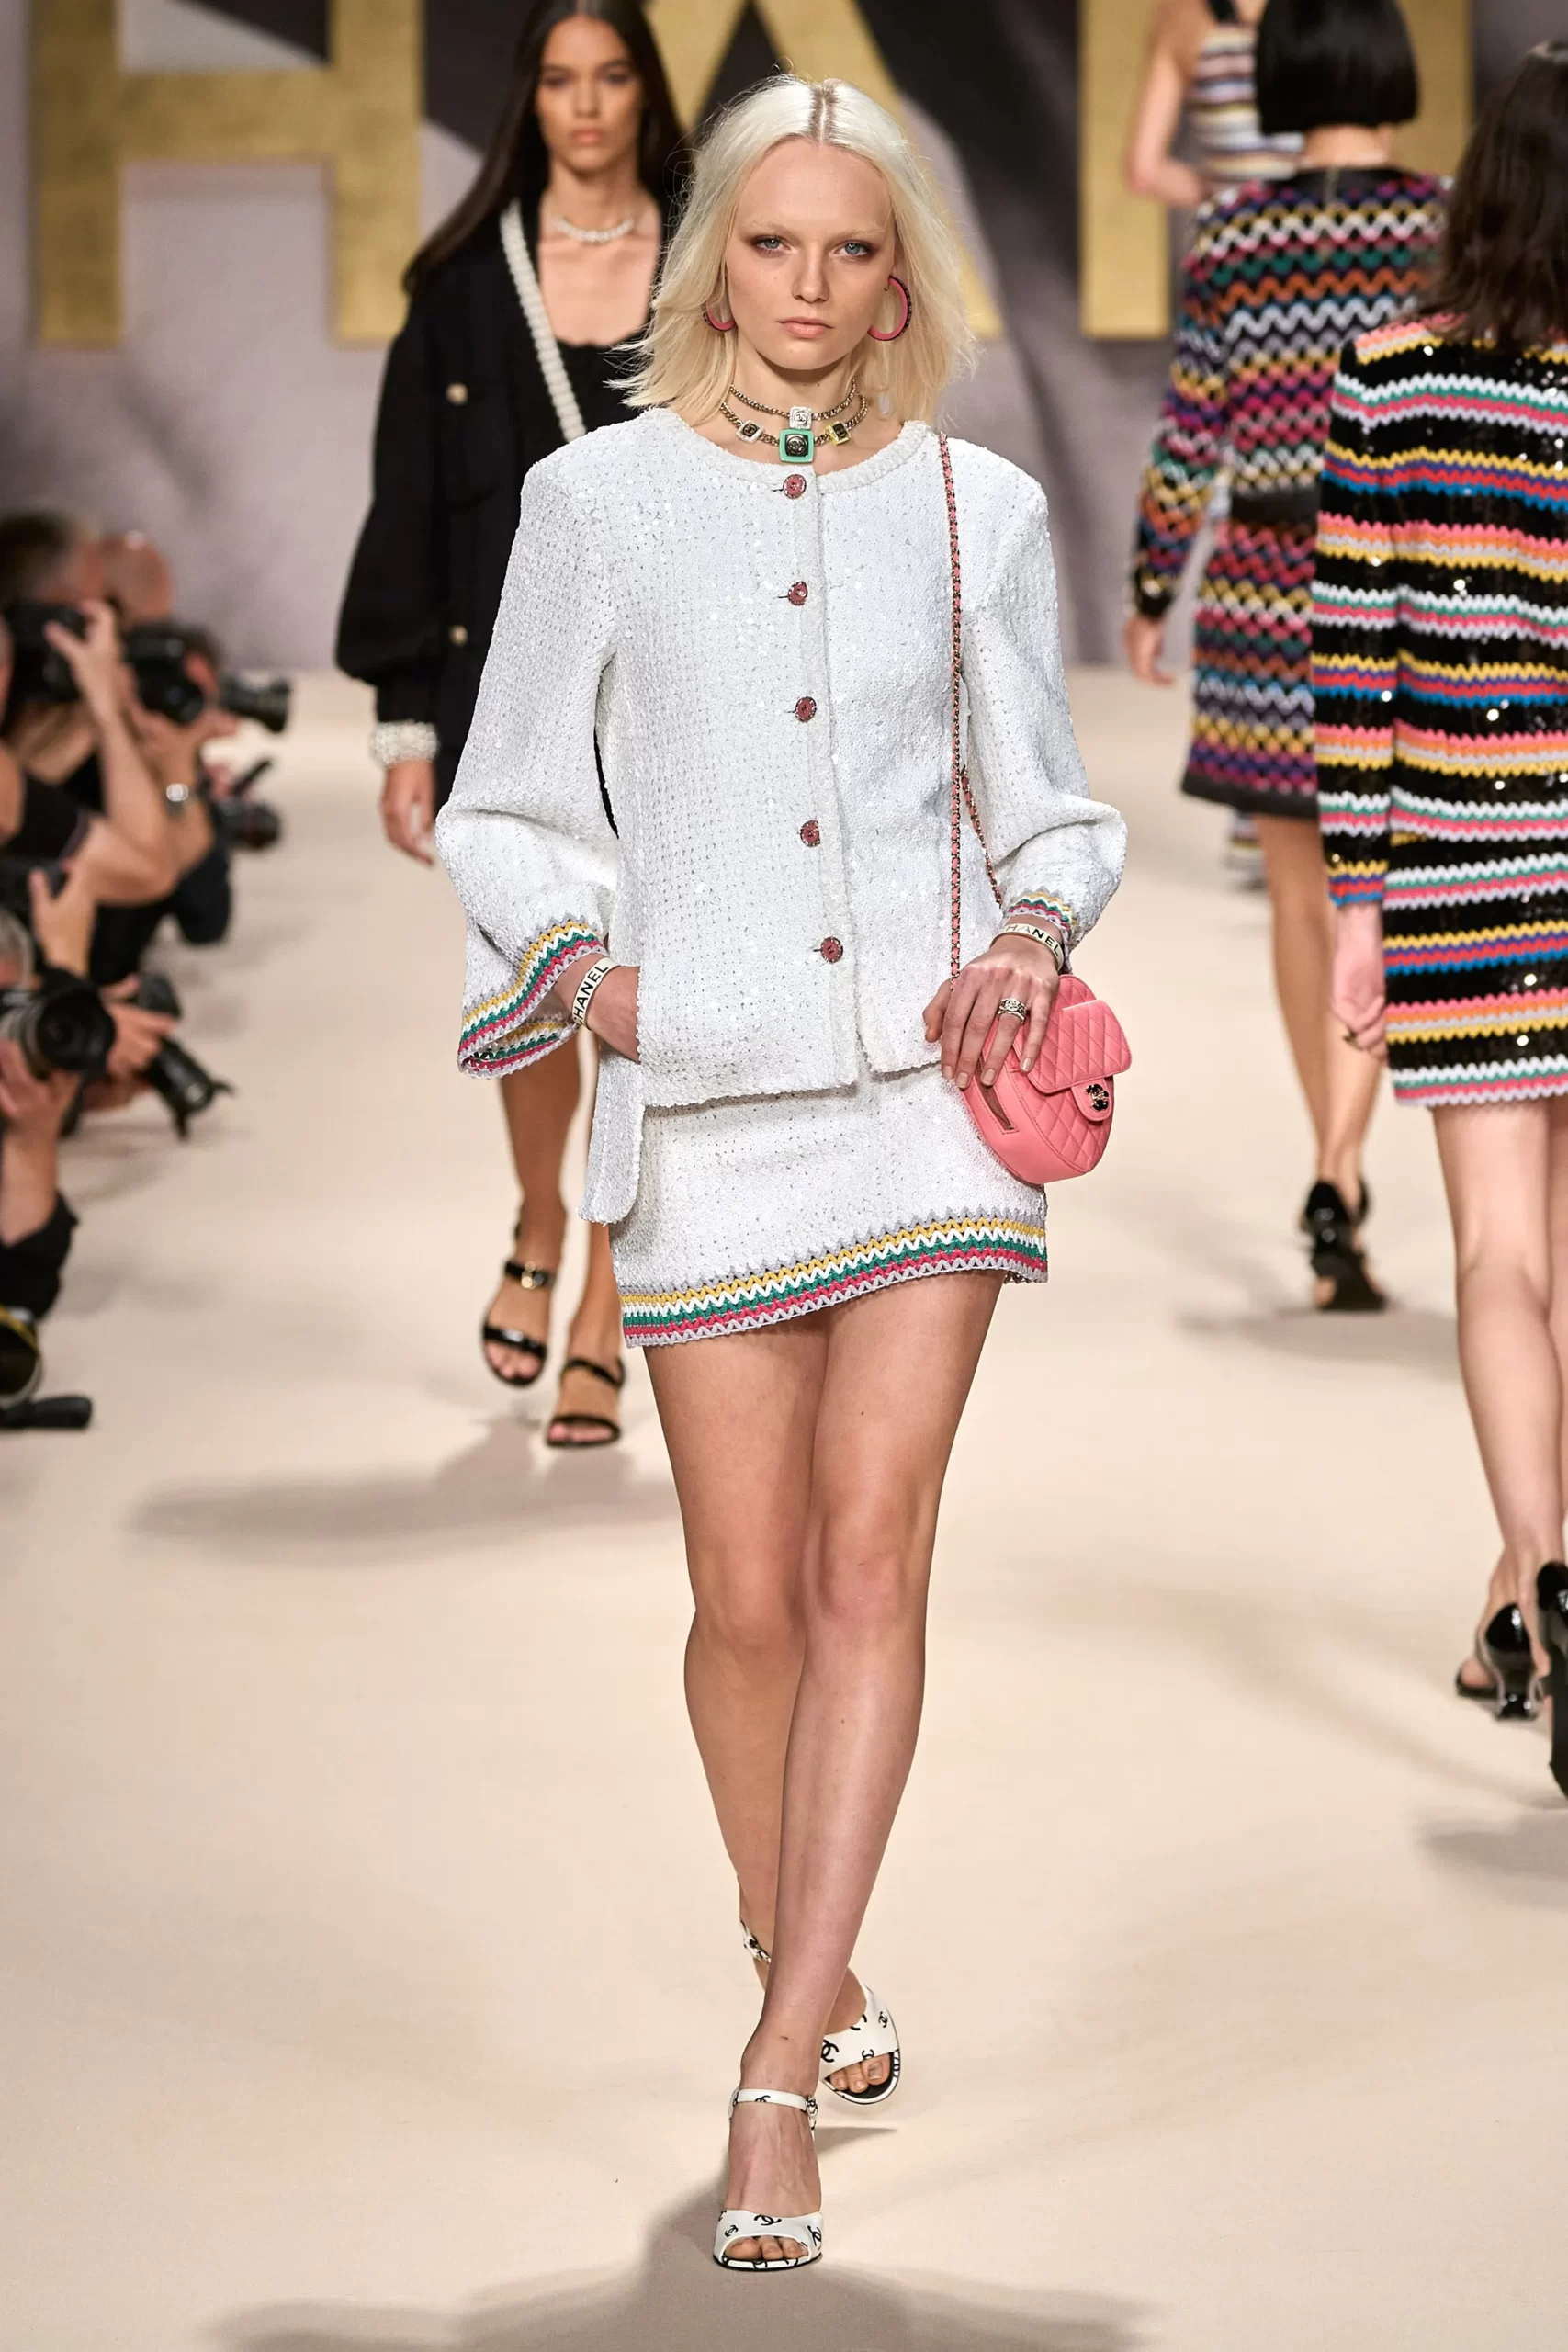 Chanel's Spring/Summer 2022 Runway Collection Is An Ode To The